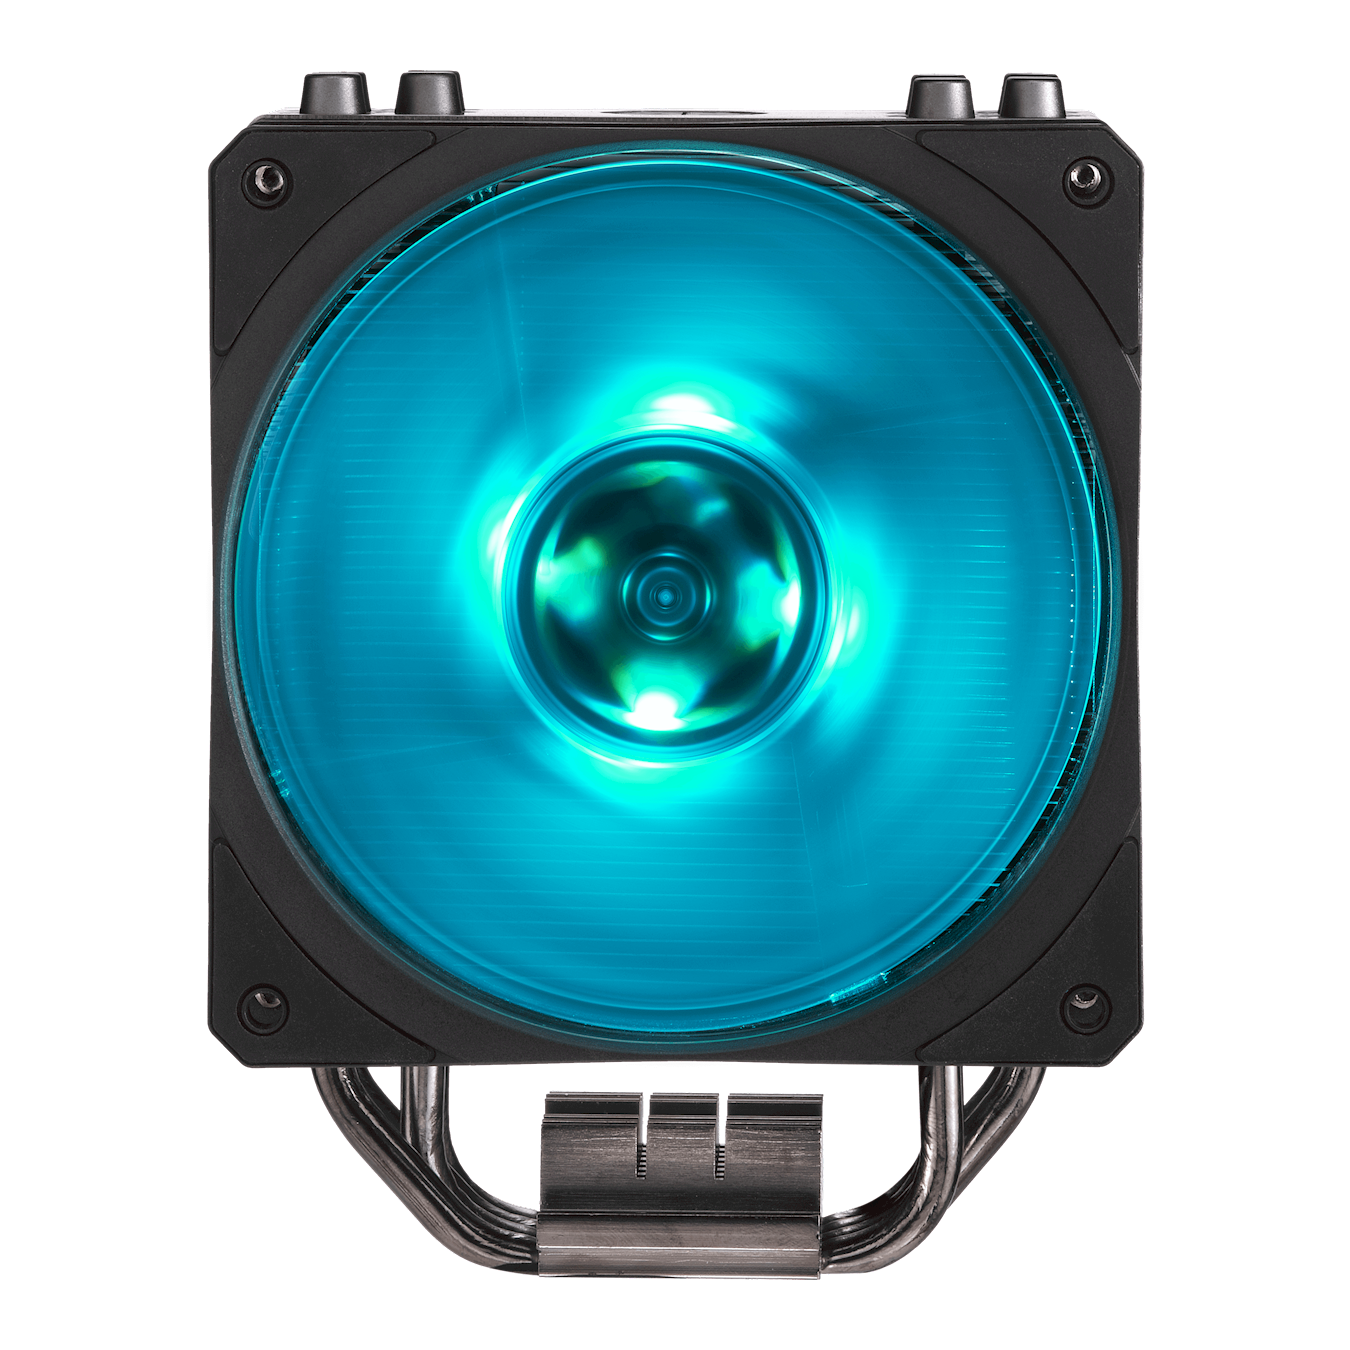 Cooler master HYPER 212 RGB Black Edition with 120mm RGB Silent Fan From Tps Technologies